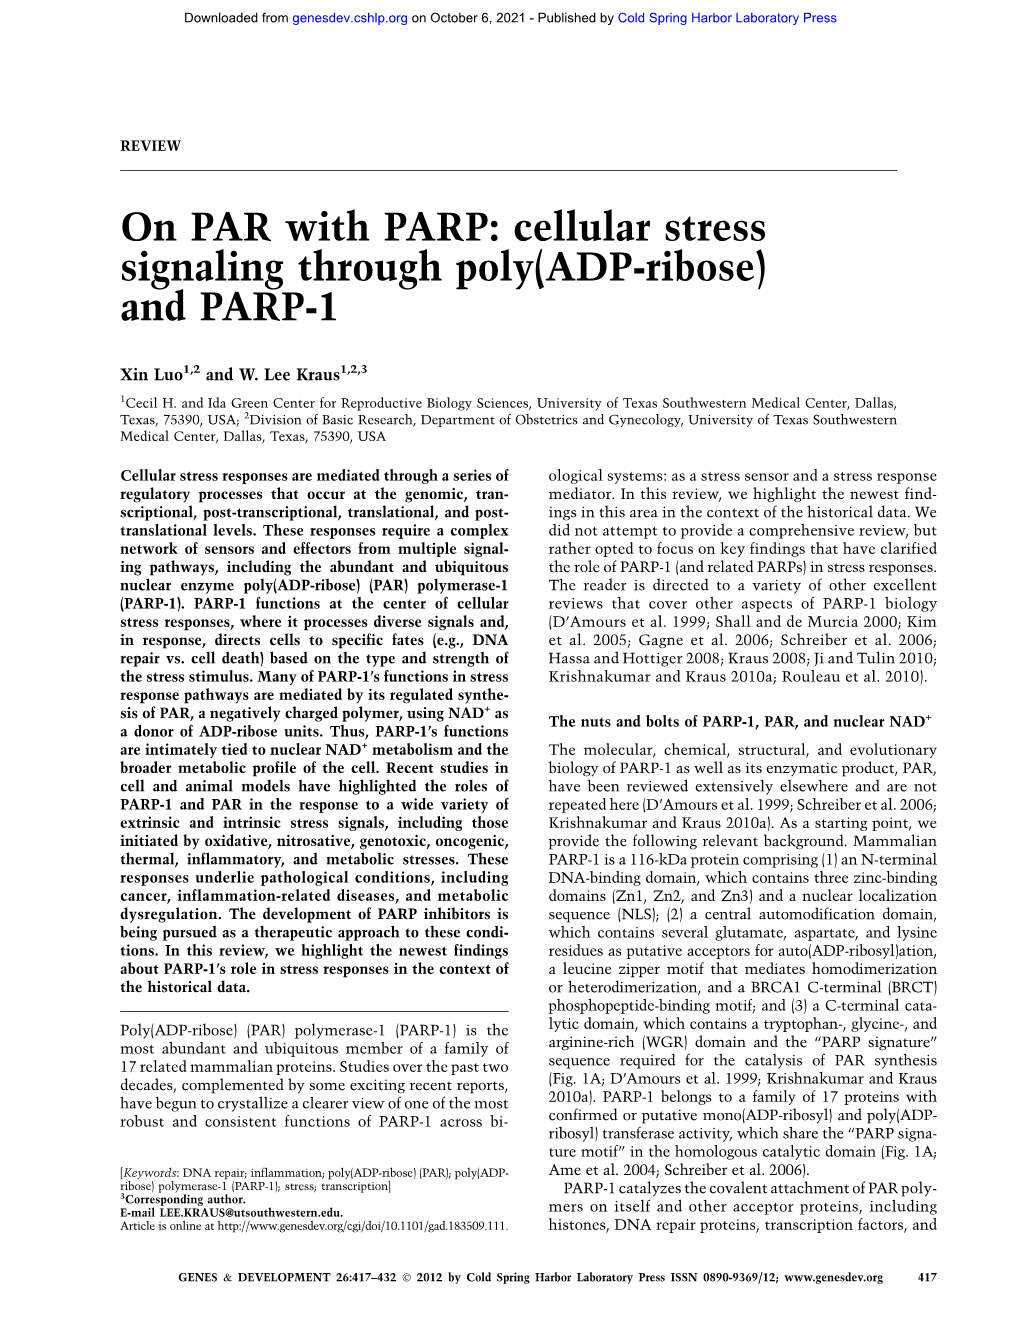 On PAR with PARP: Cellular Stress Signaling Through Poly(ADP-Ribose) and PARP-1